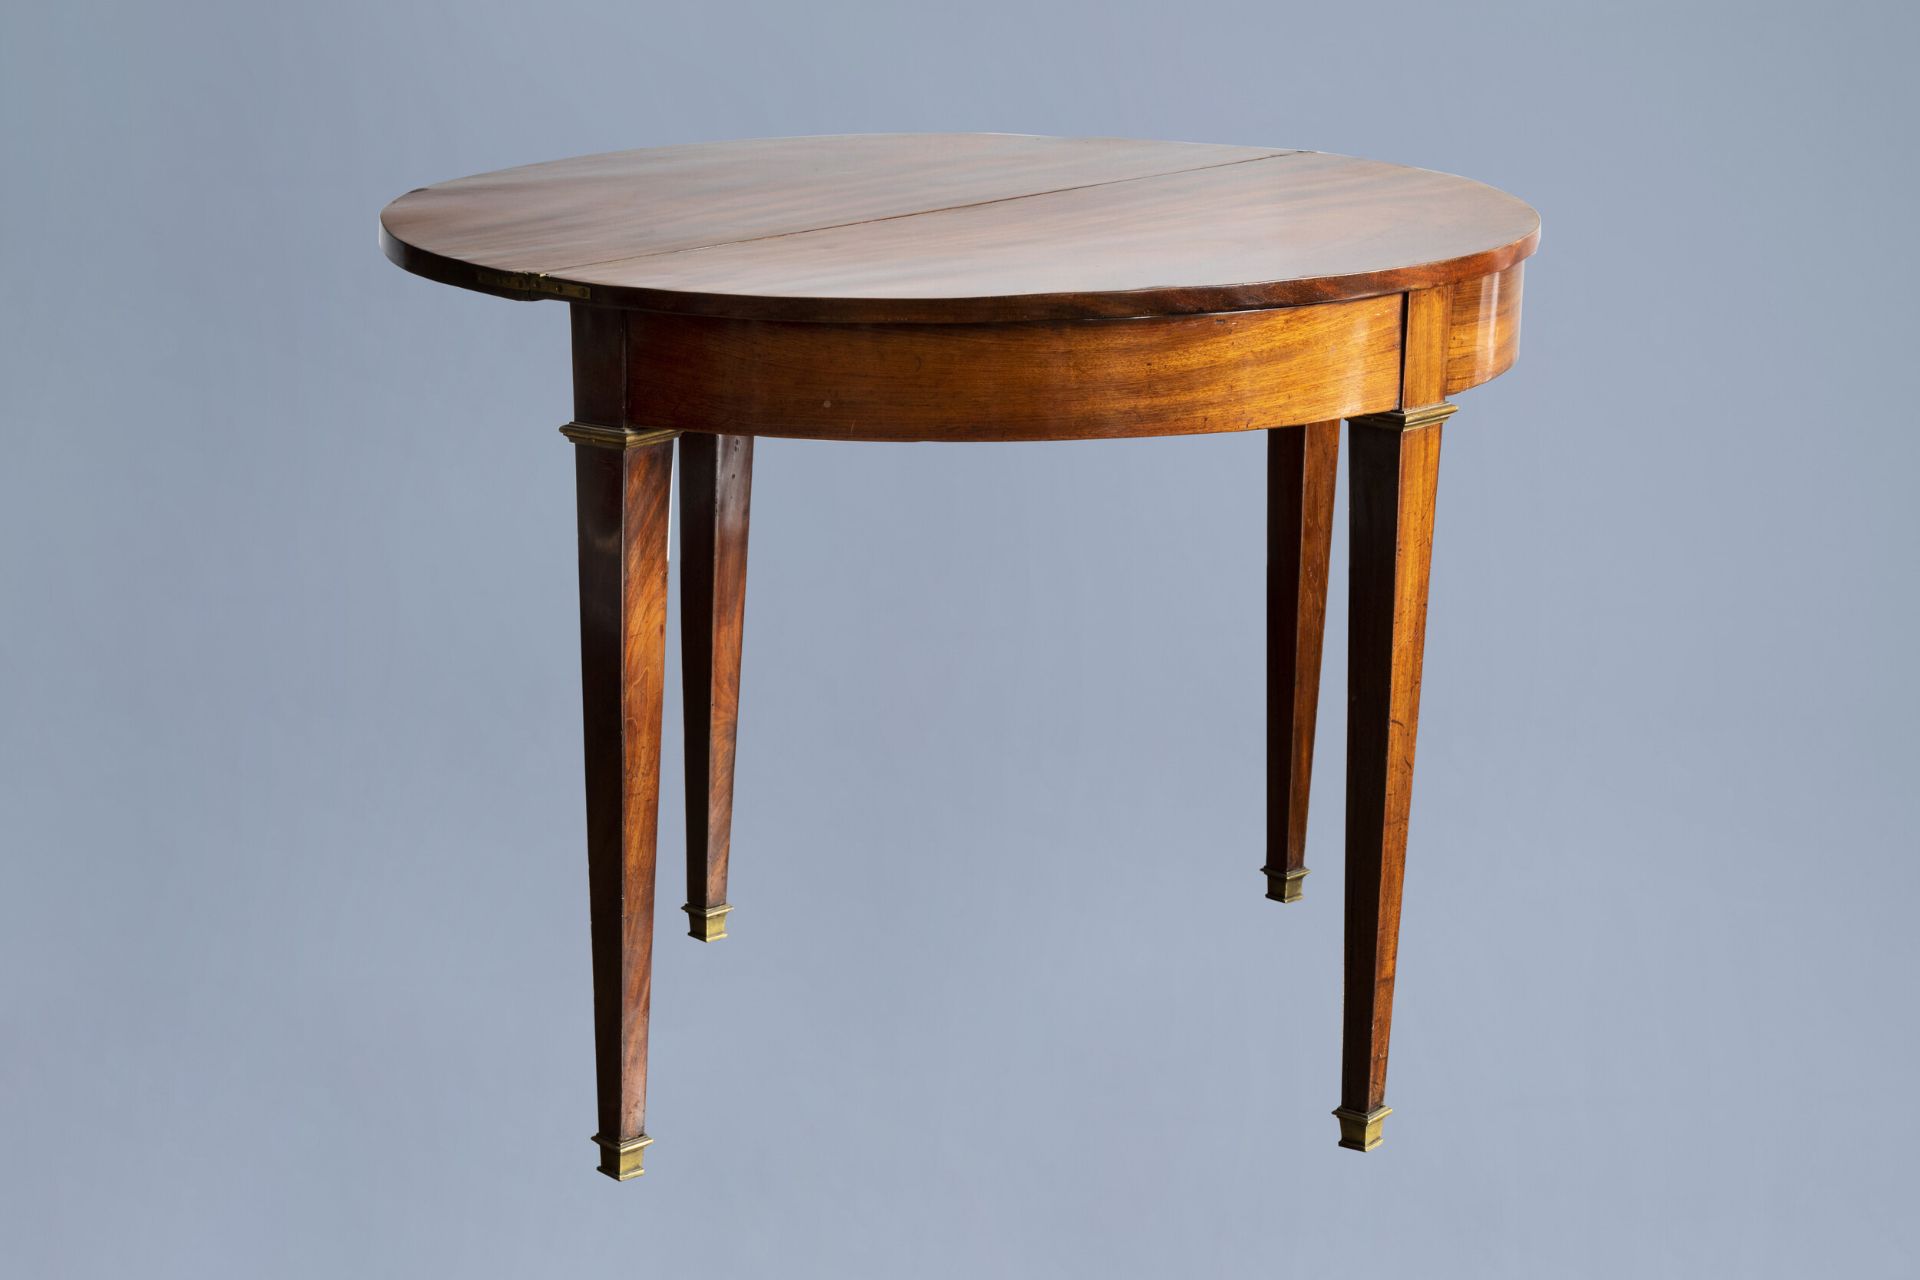 A French Directoire wood 'demi lune' console table, ca. 1800